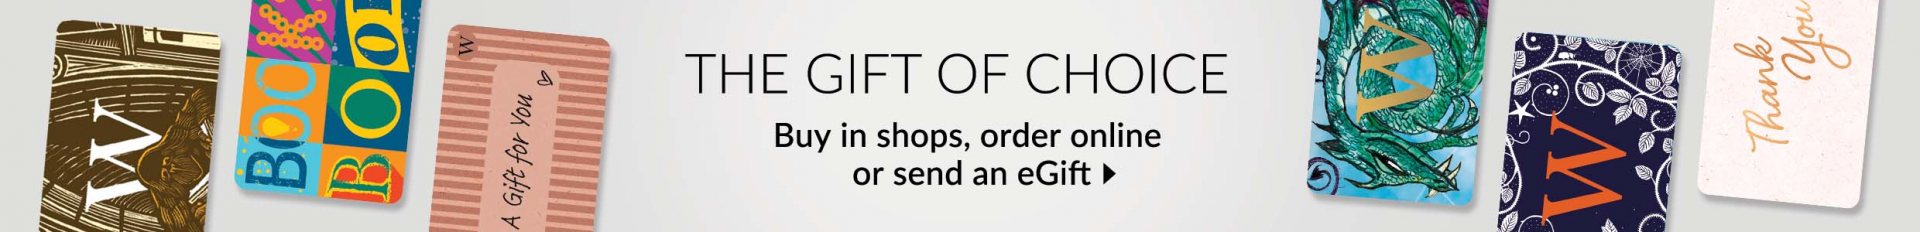 The Gift of Choice | Waterstones Gift Cards